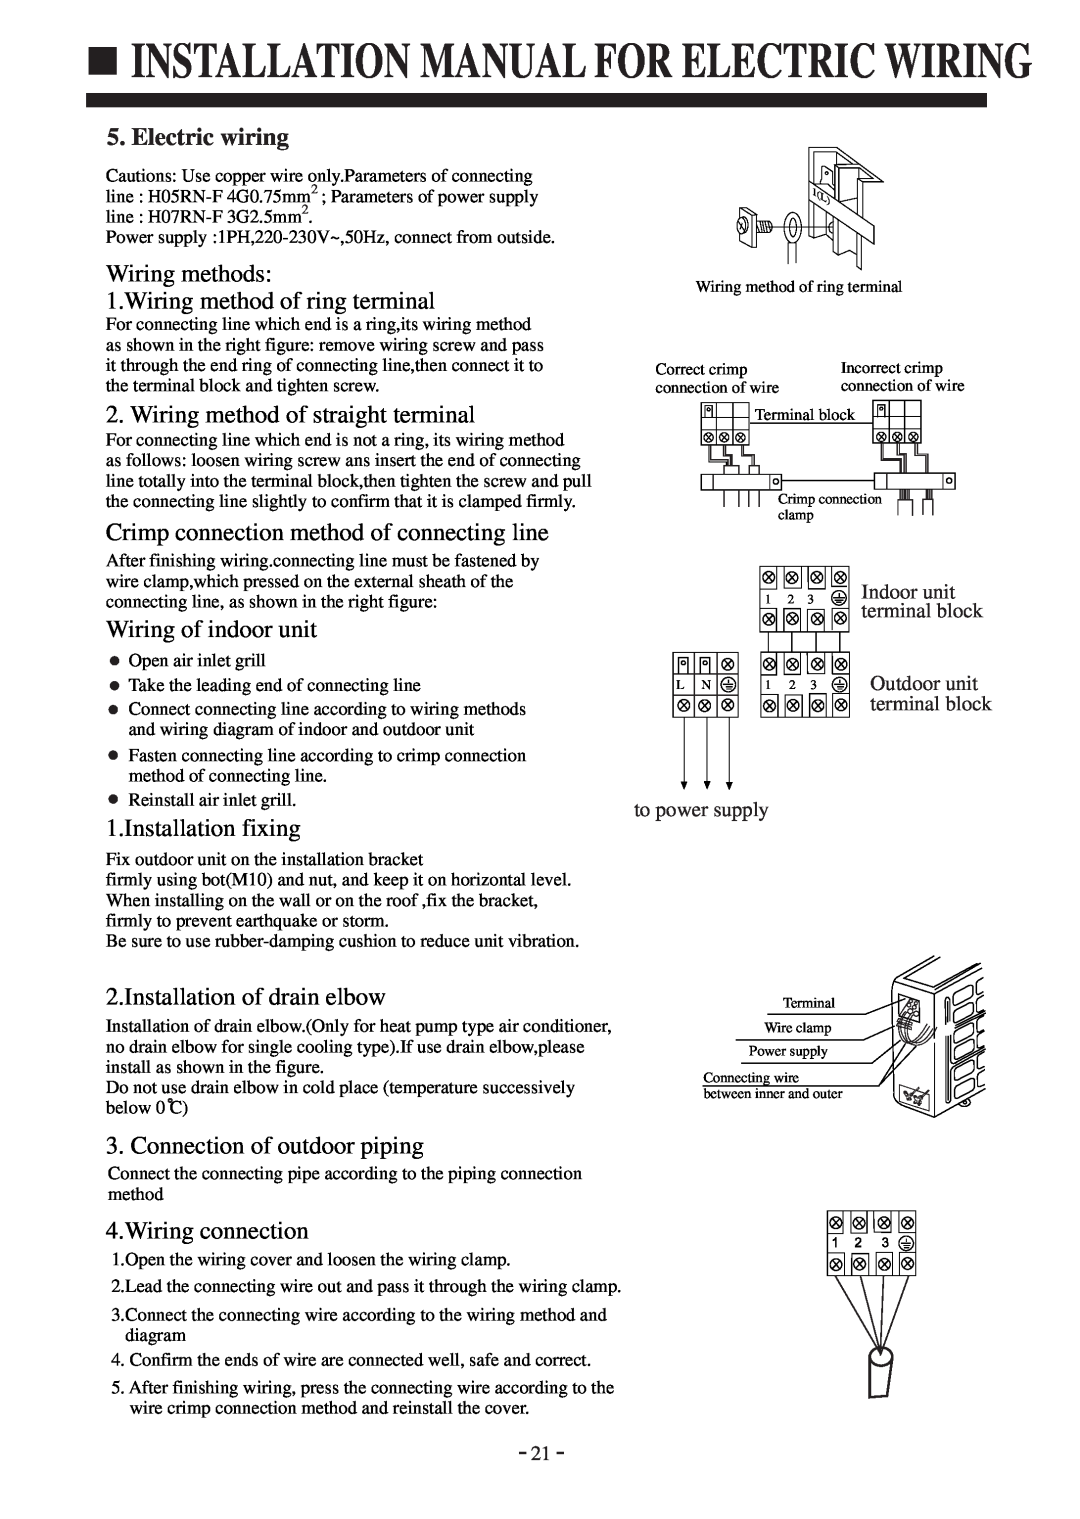 Haier AD142AMBIA Installation Manual For Electric Wiring, Electric wiring, Indoor unit terminal block, to power supply 